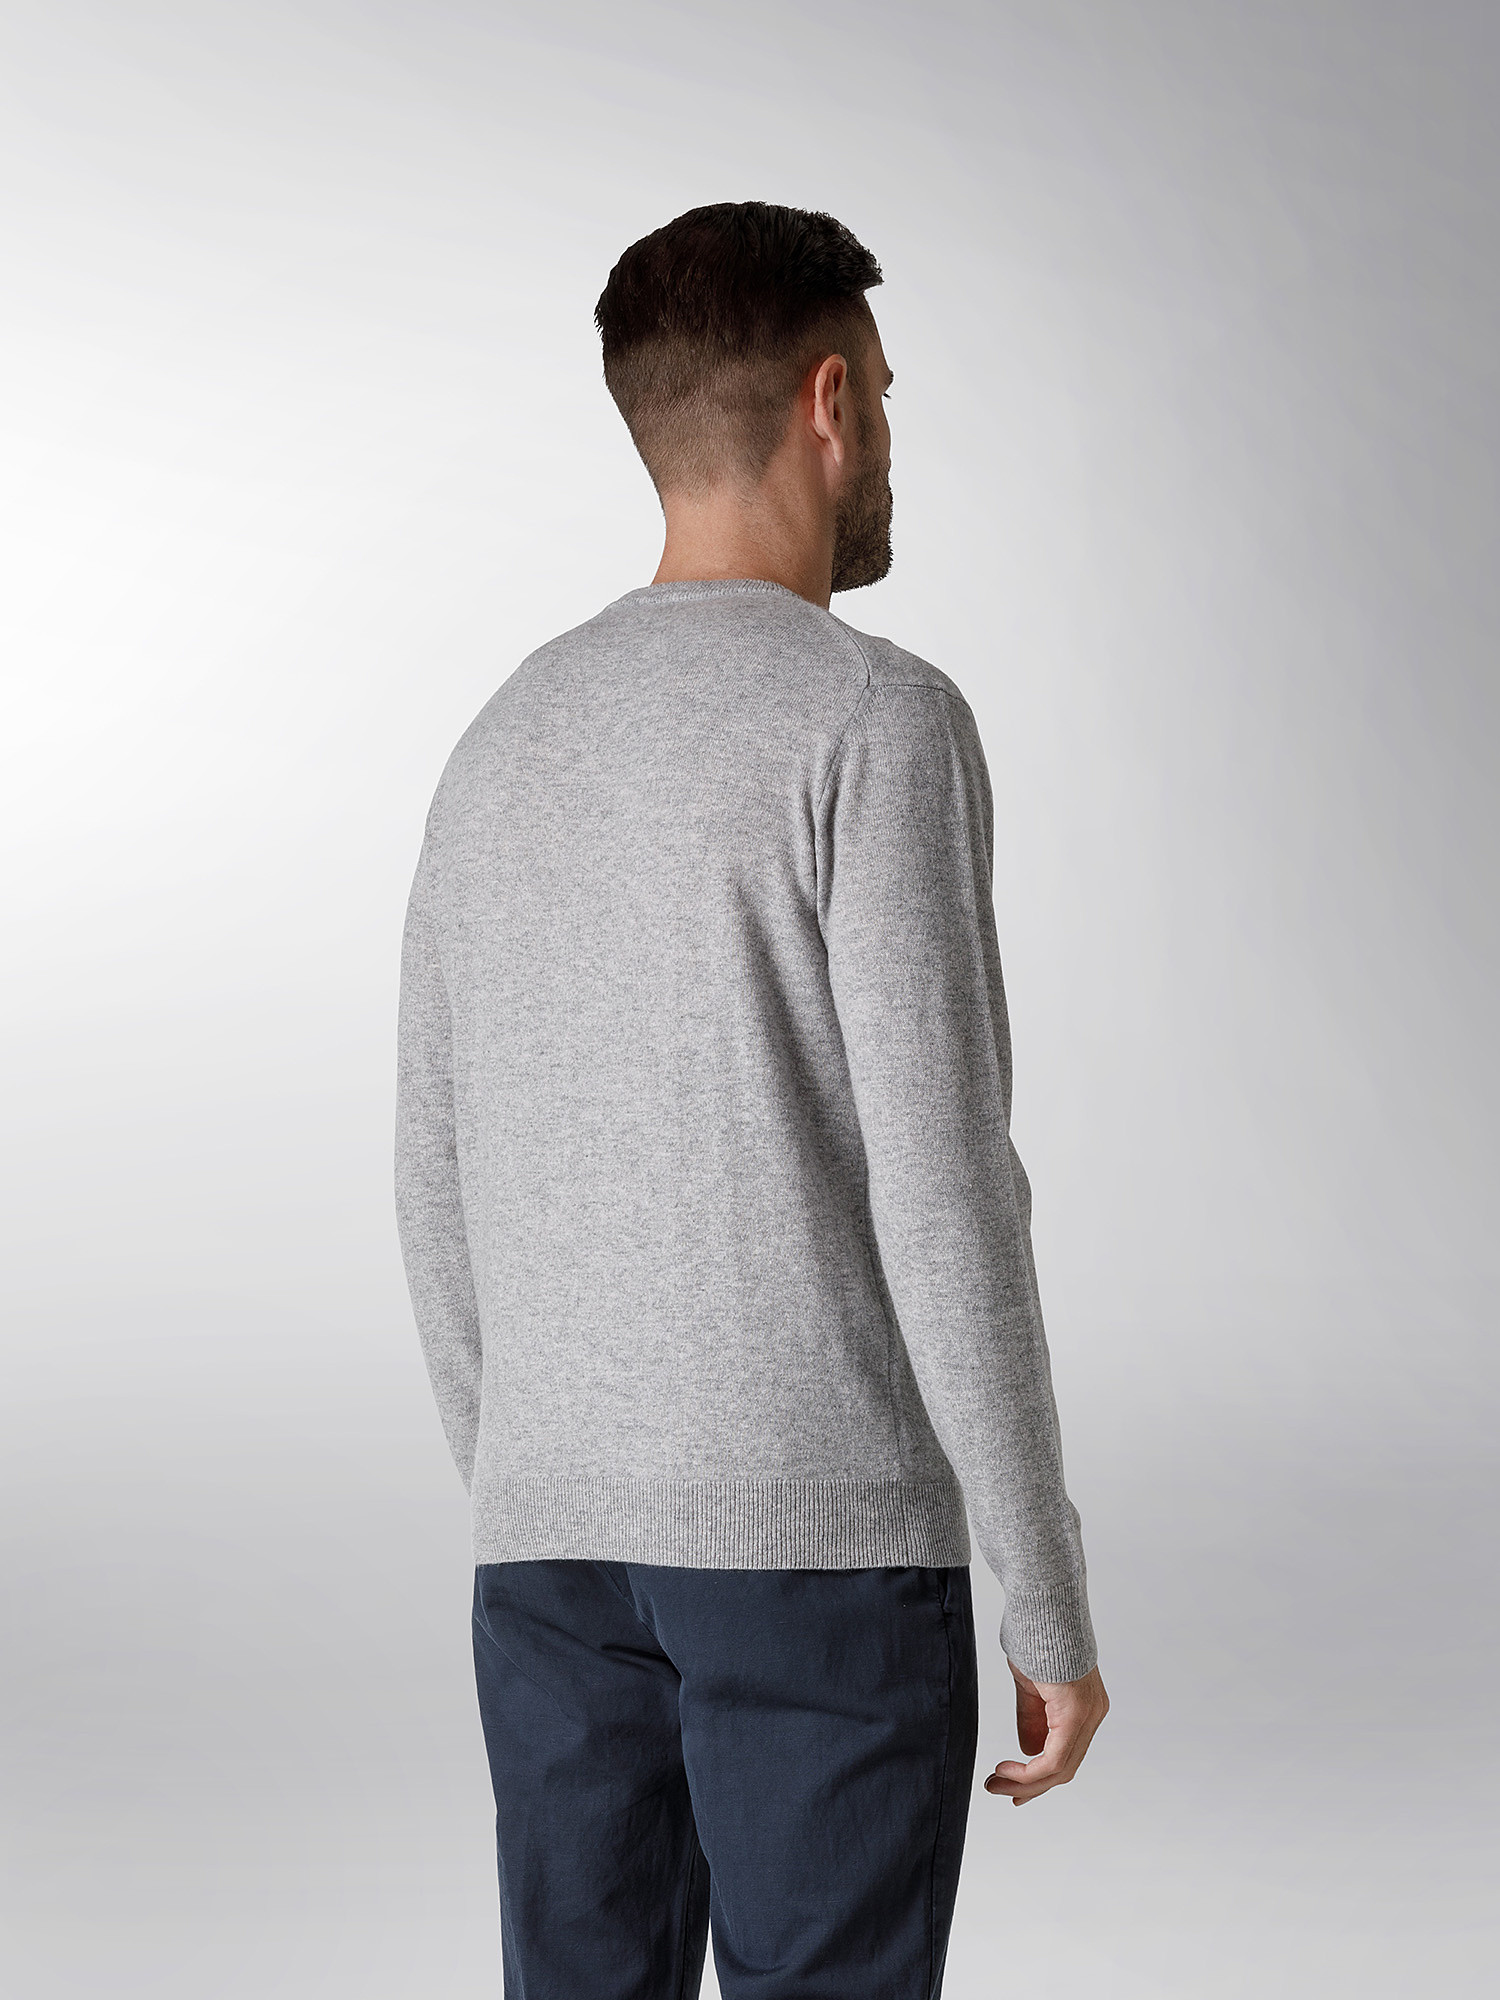 Coin Cashmere - Crewneck sweater in pure premium cashmere, Light Grey, large image number 2